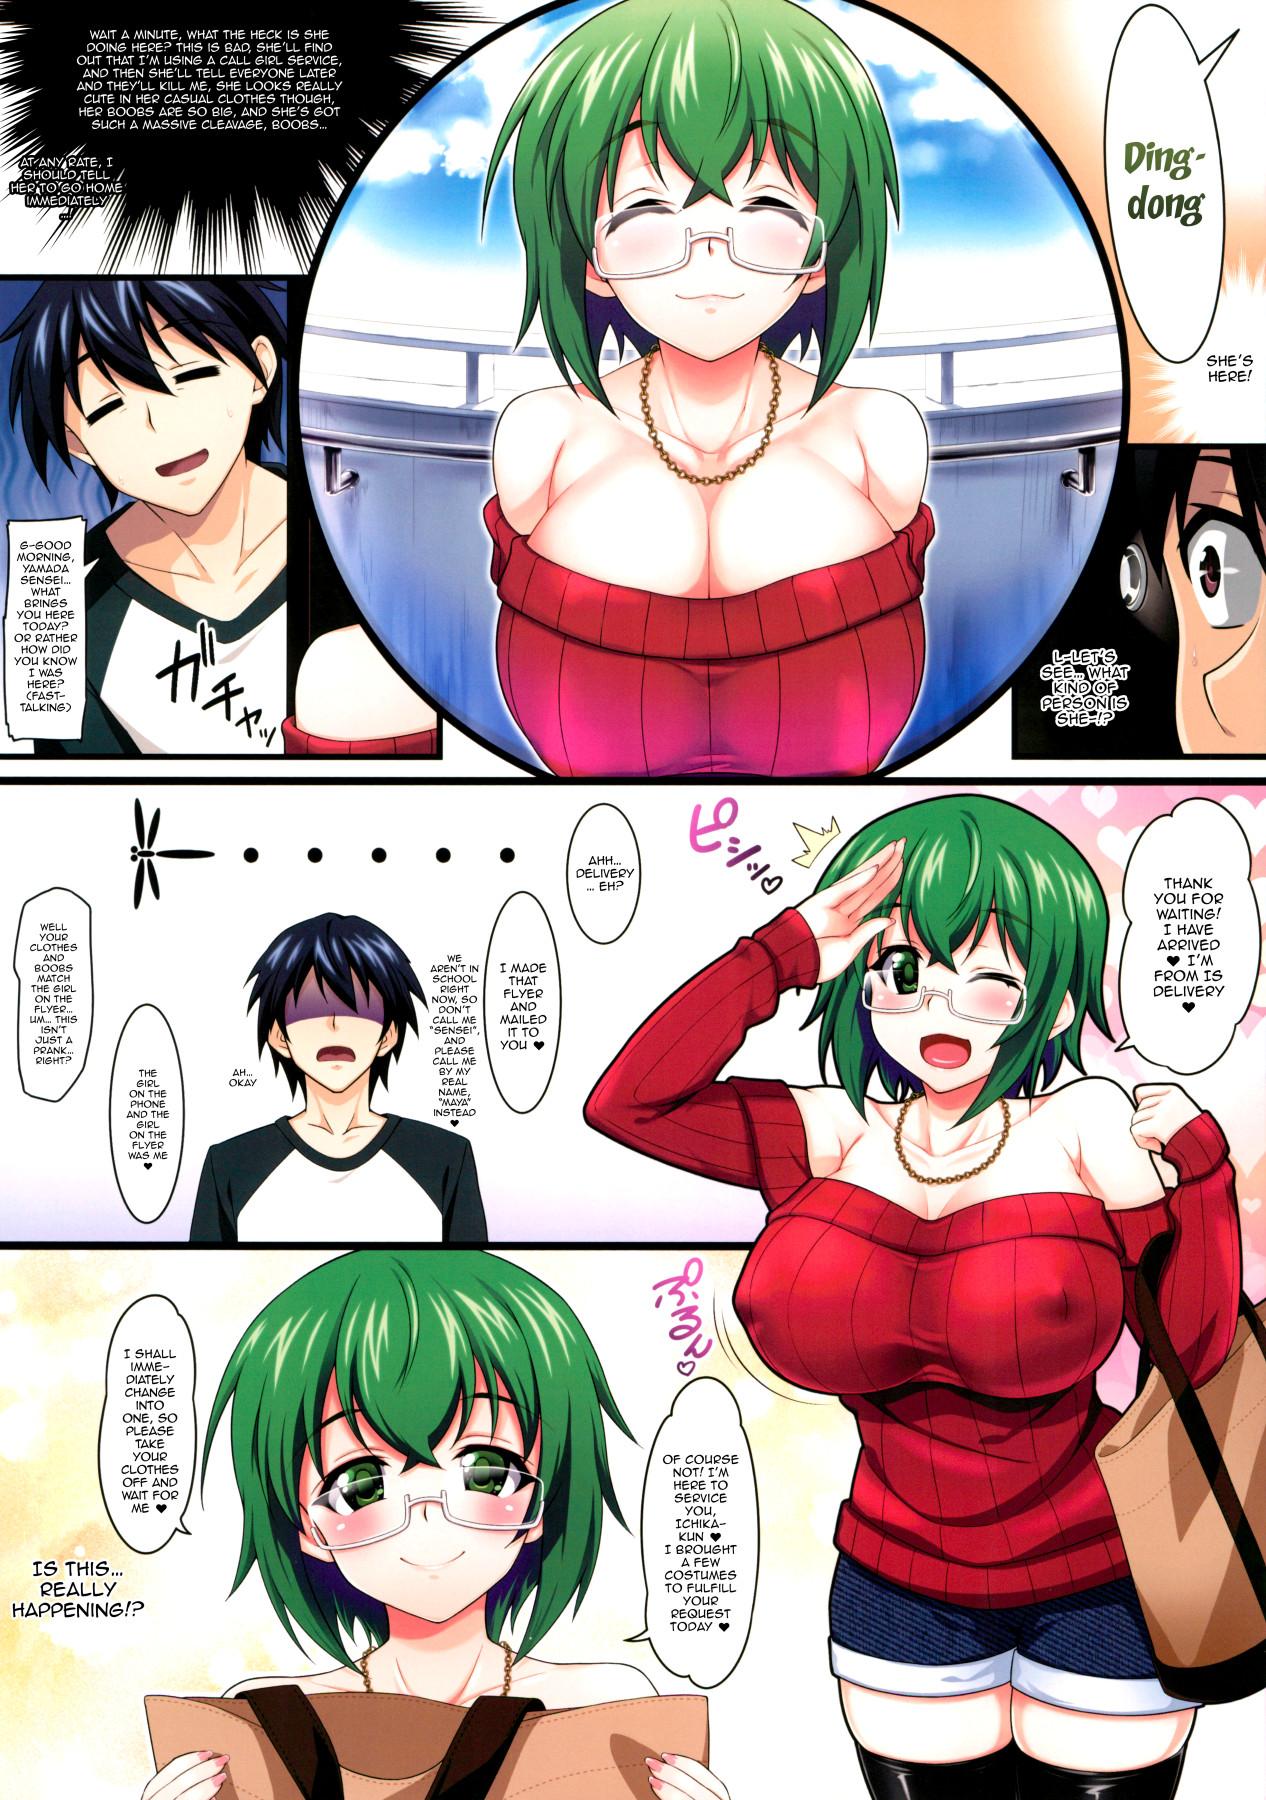 Gays maya kore is delivery - Infinite stratos Pounding - Page 3